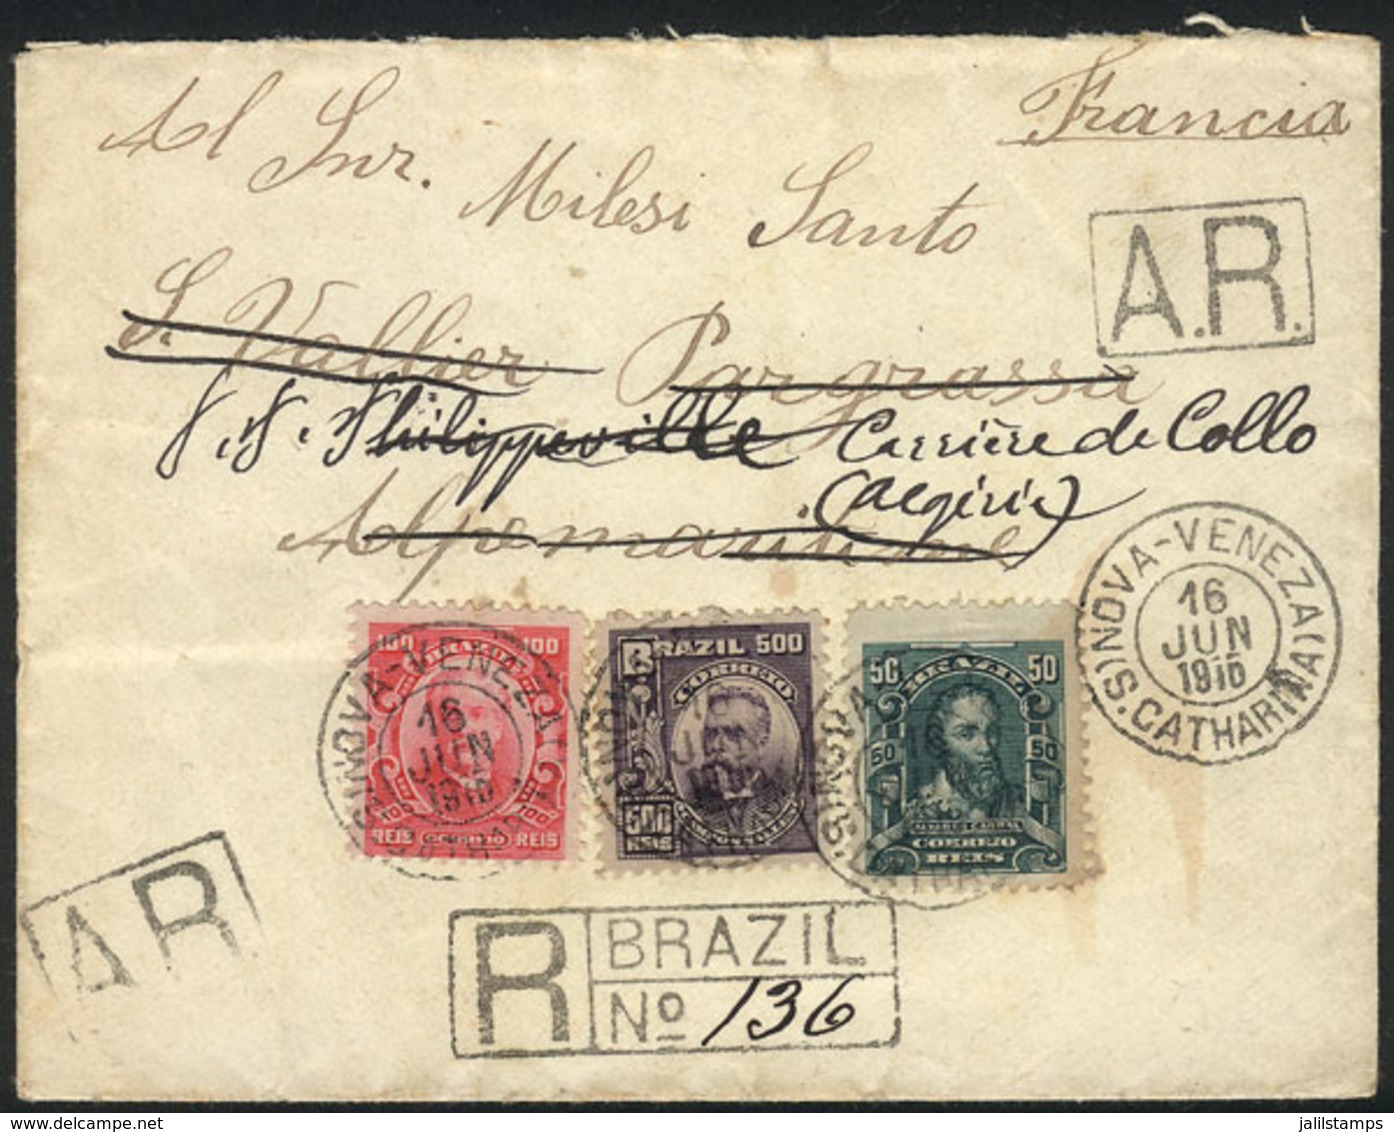 BRAZIL: Registered Cover With AR Sent From NOVA-VENEZA To France On 16/JUN/1910, Franked With 650Rs., VF! - Prephilately